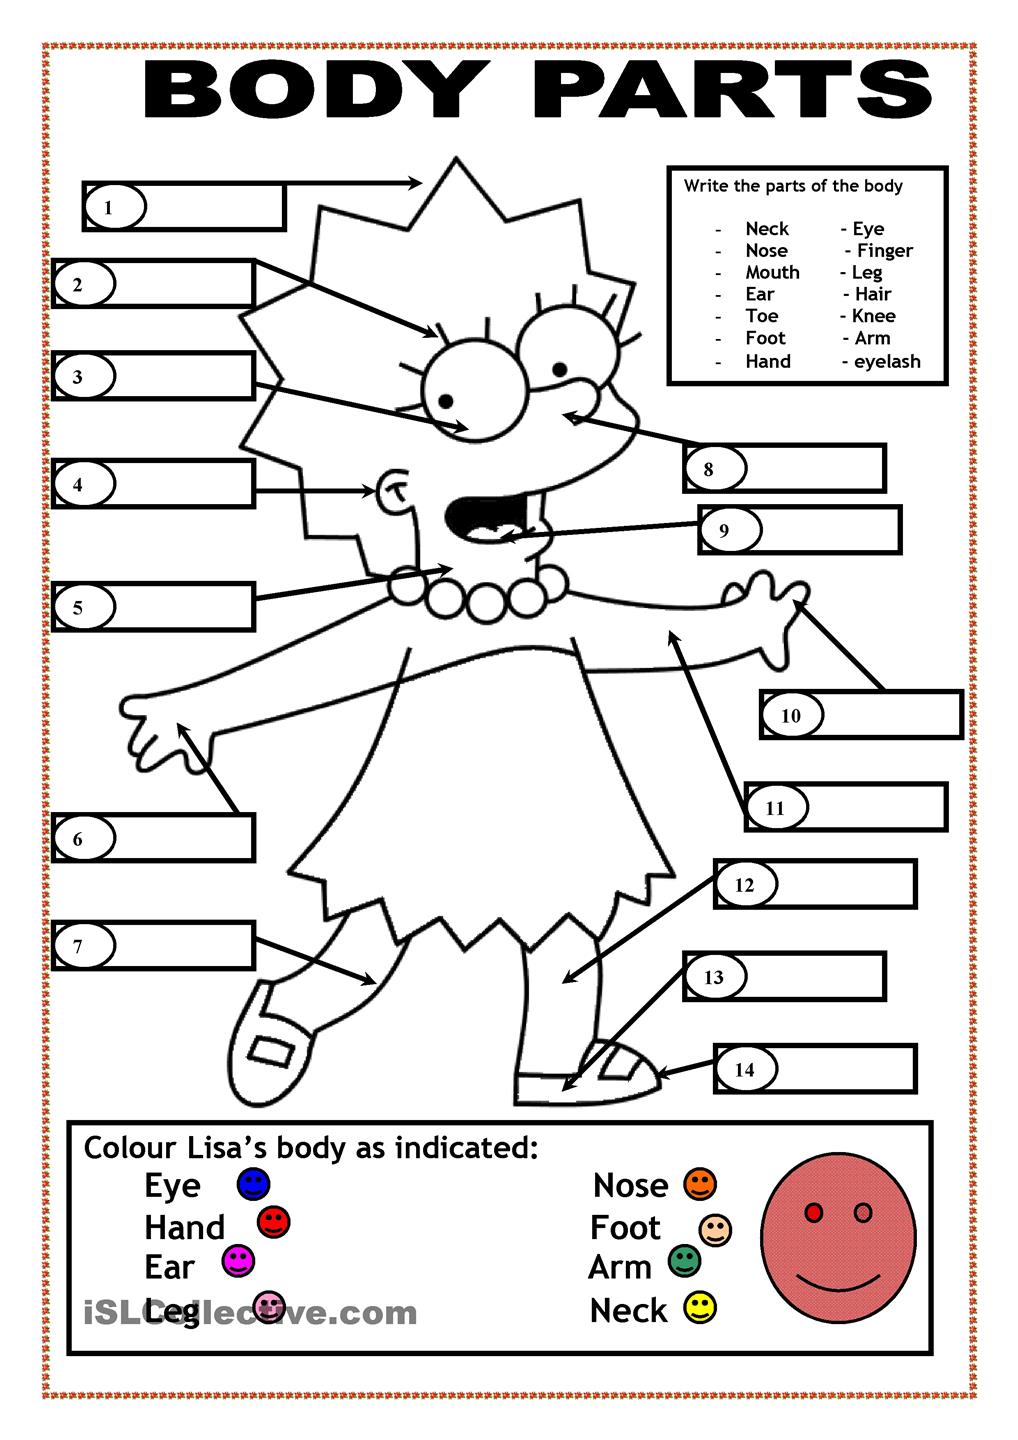 Body Parts Coloring Pages - Coloring Home